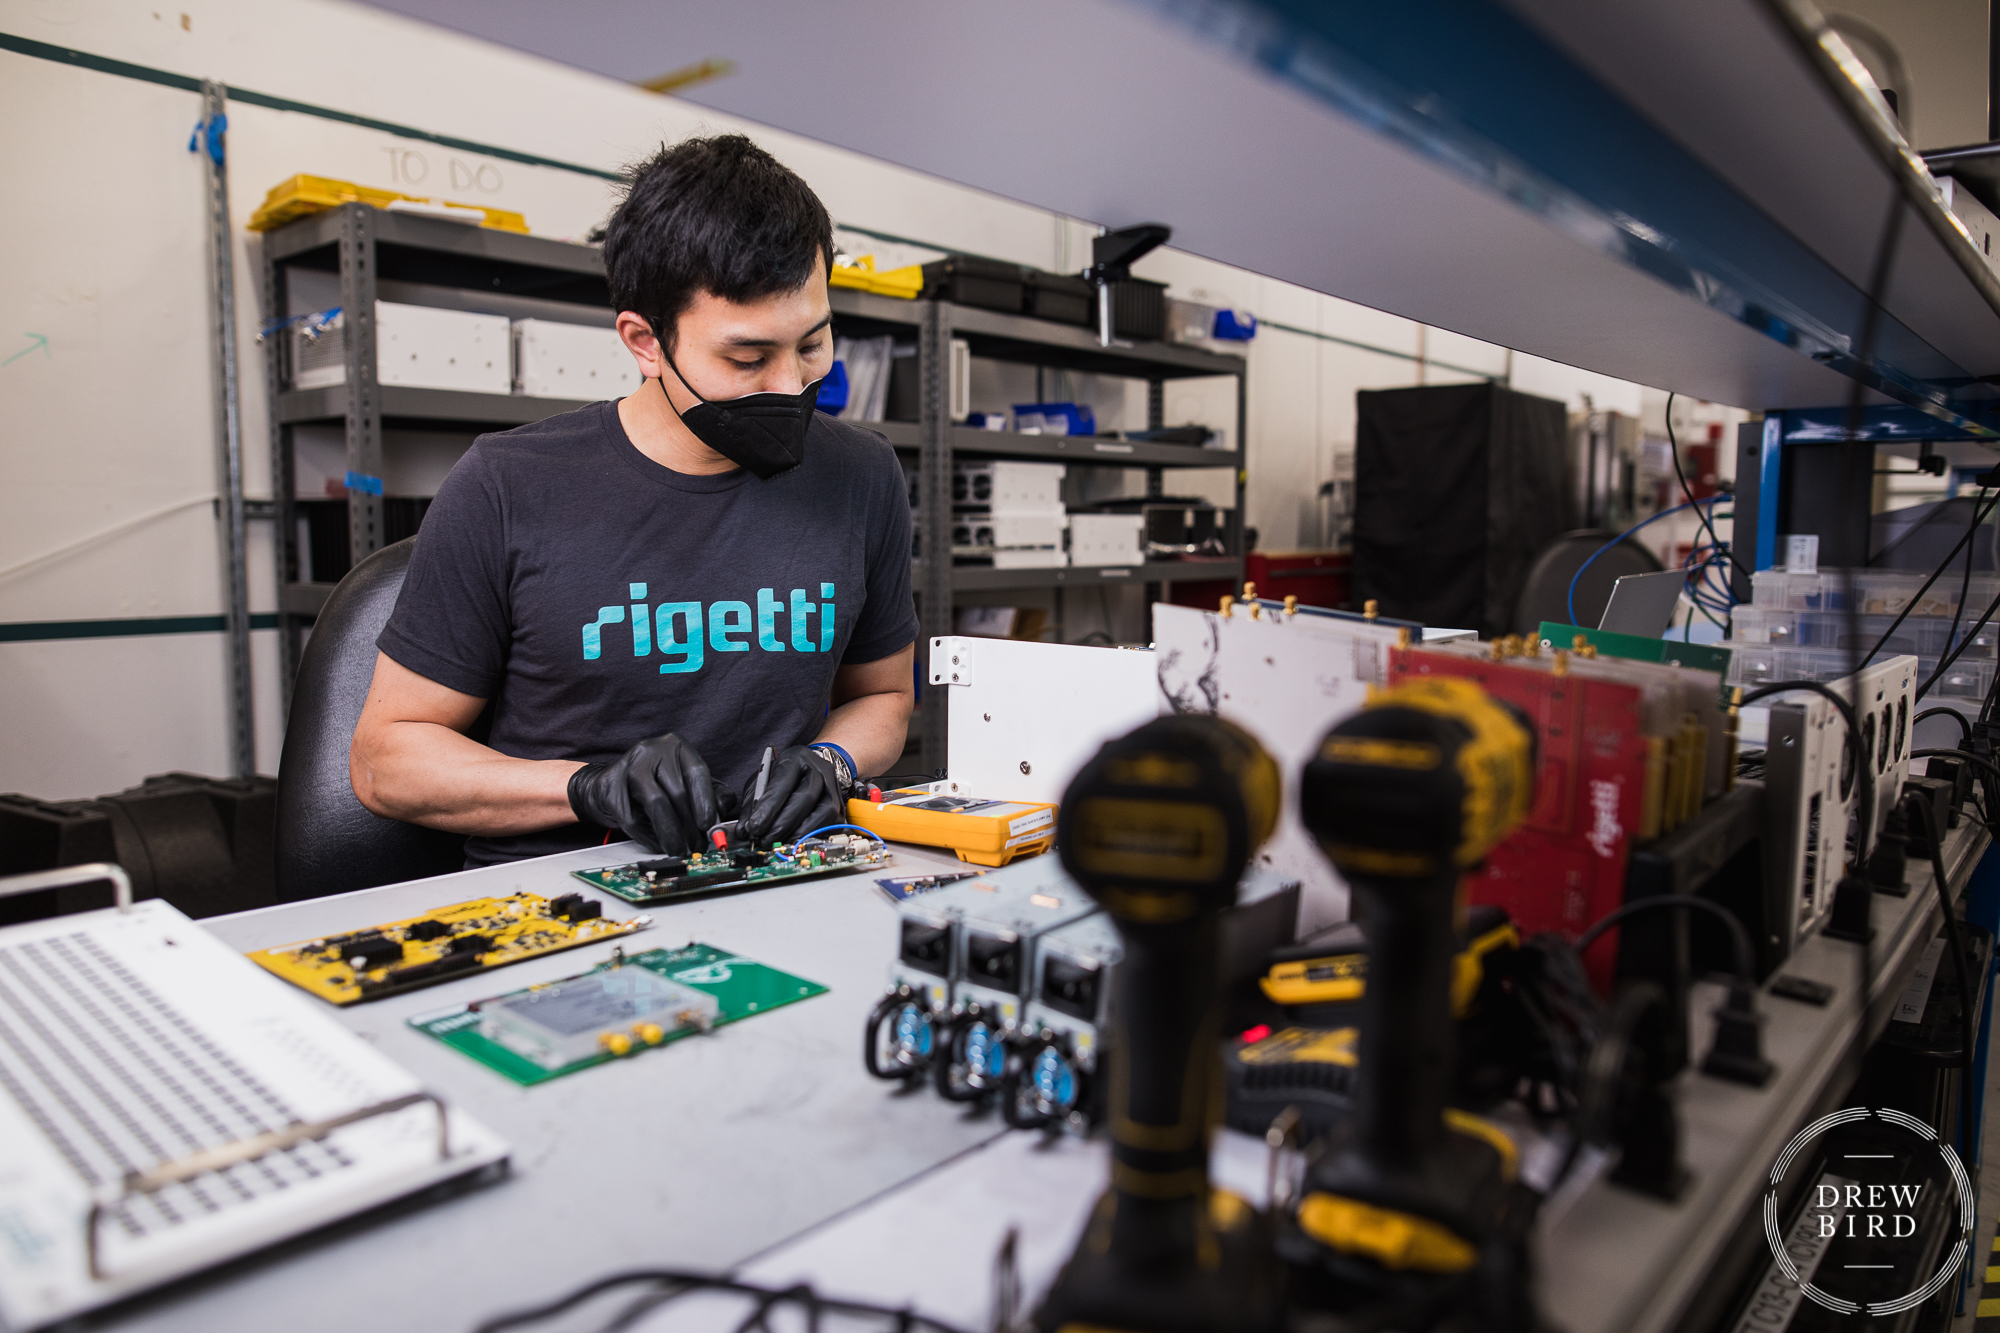 An engineer works to assemble a quantum computer processor at Rigetti in Berkeley, California. Corporate photography by Drew Bird.